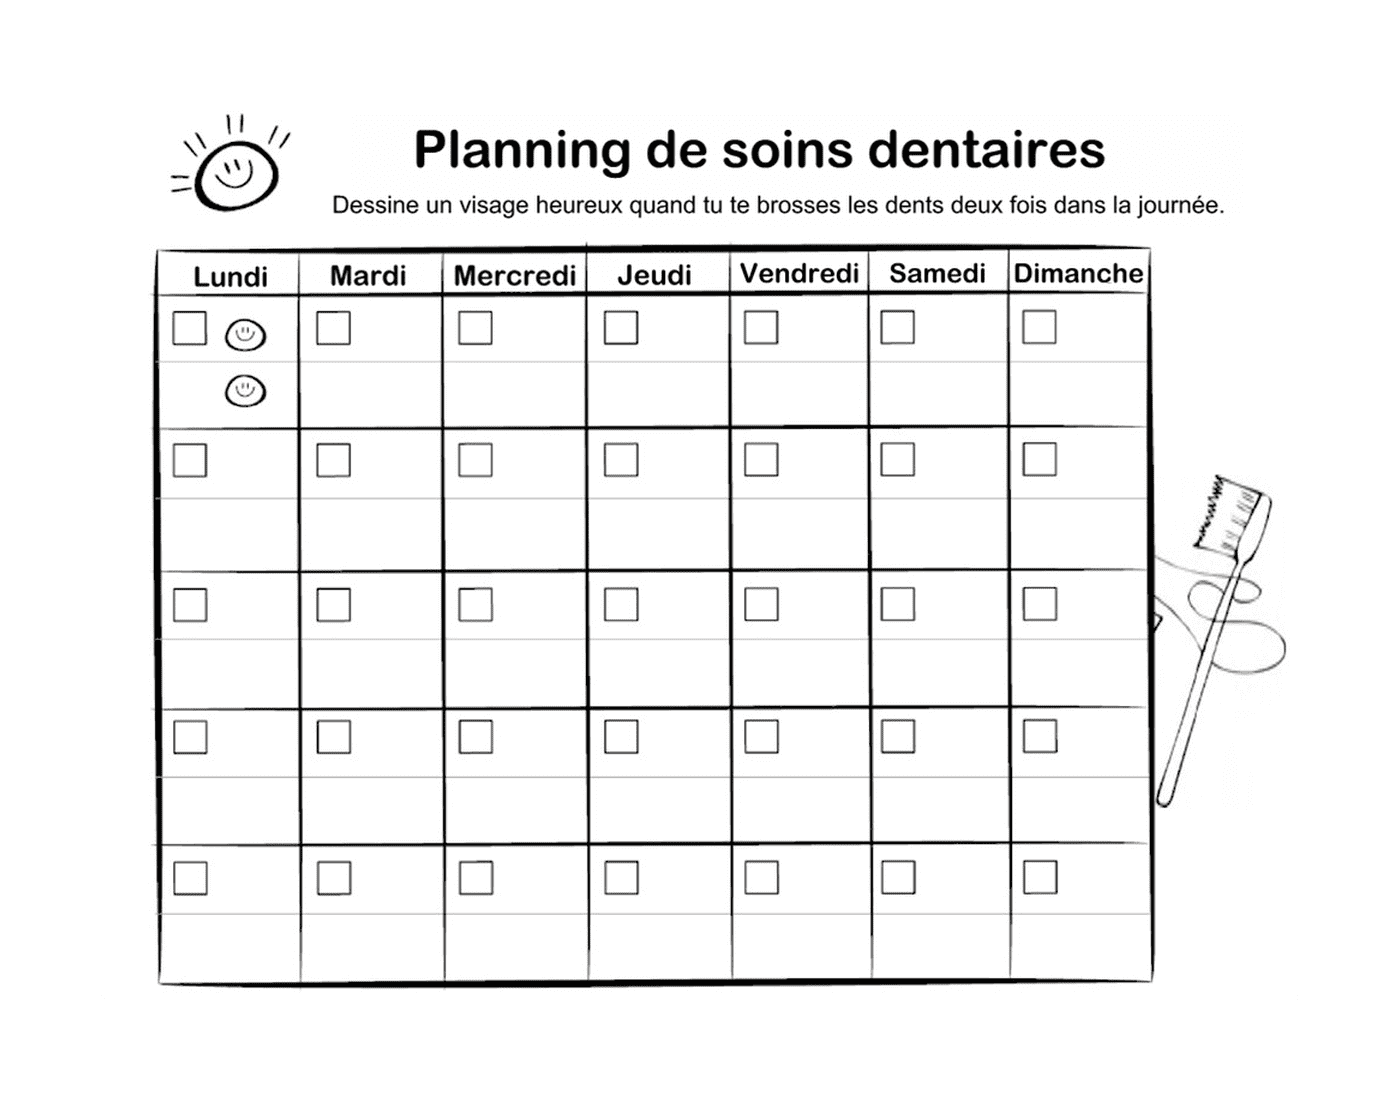 coloriage calendrier planning soins dentaires dents dentiste